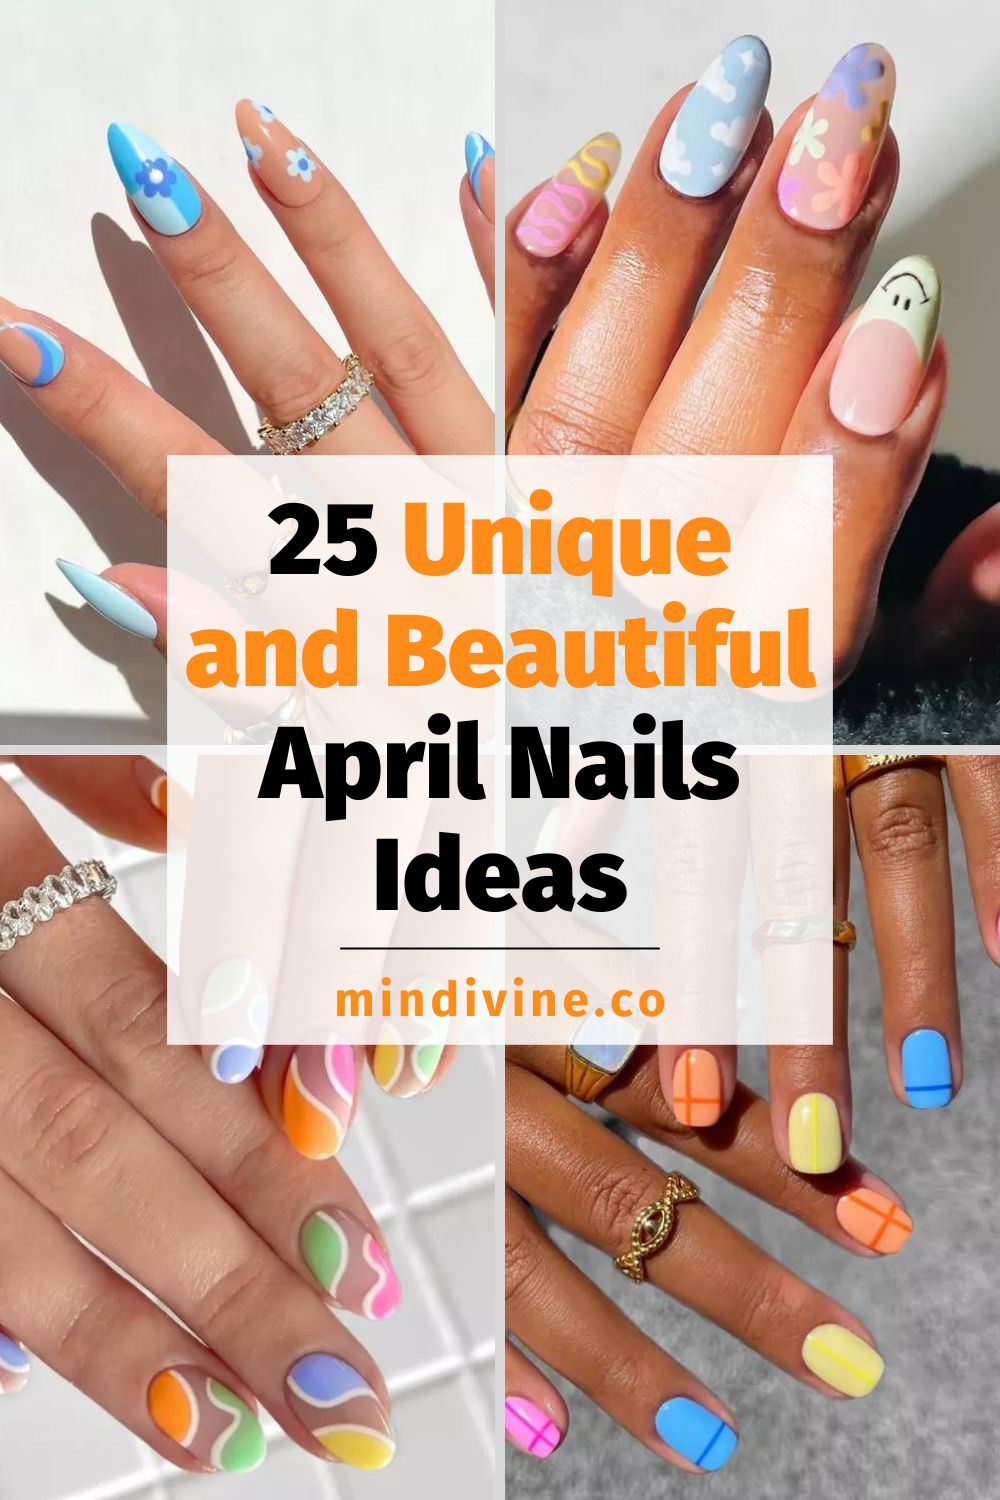 4 April nails ideas with colorful designs